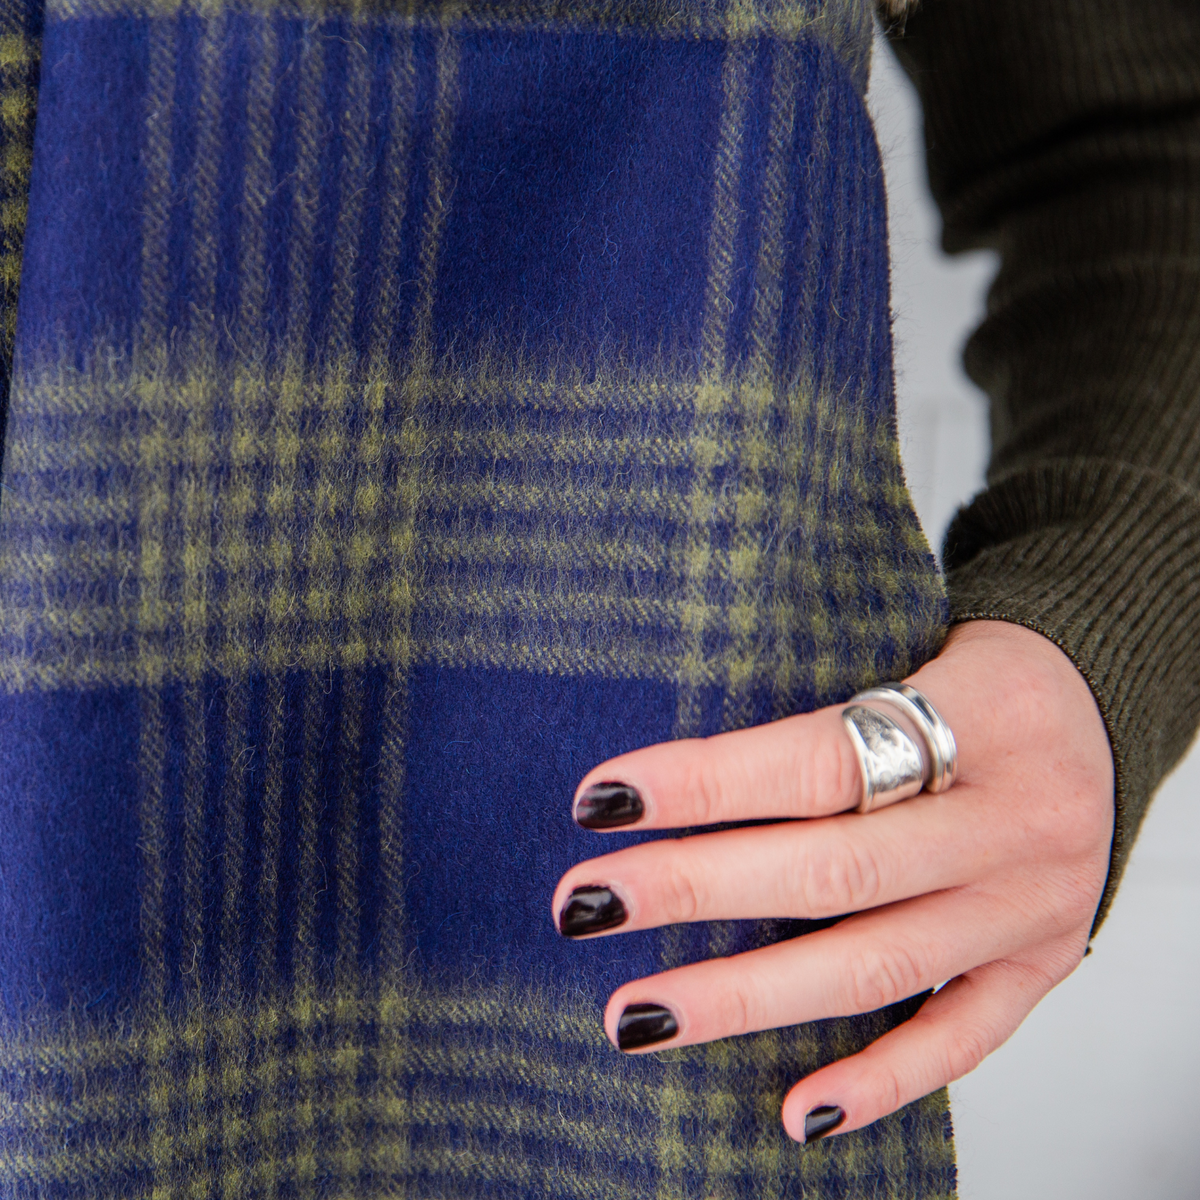 A close up photo of a woman&#39;s hand with black painted nails holding an Alpacas of Montana soft stylish women&#39;s fashion comfortable cozy cute warm alpaca wool green and navy blue plaid pattern scarf with tassels.